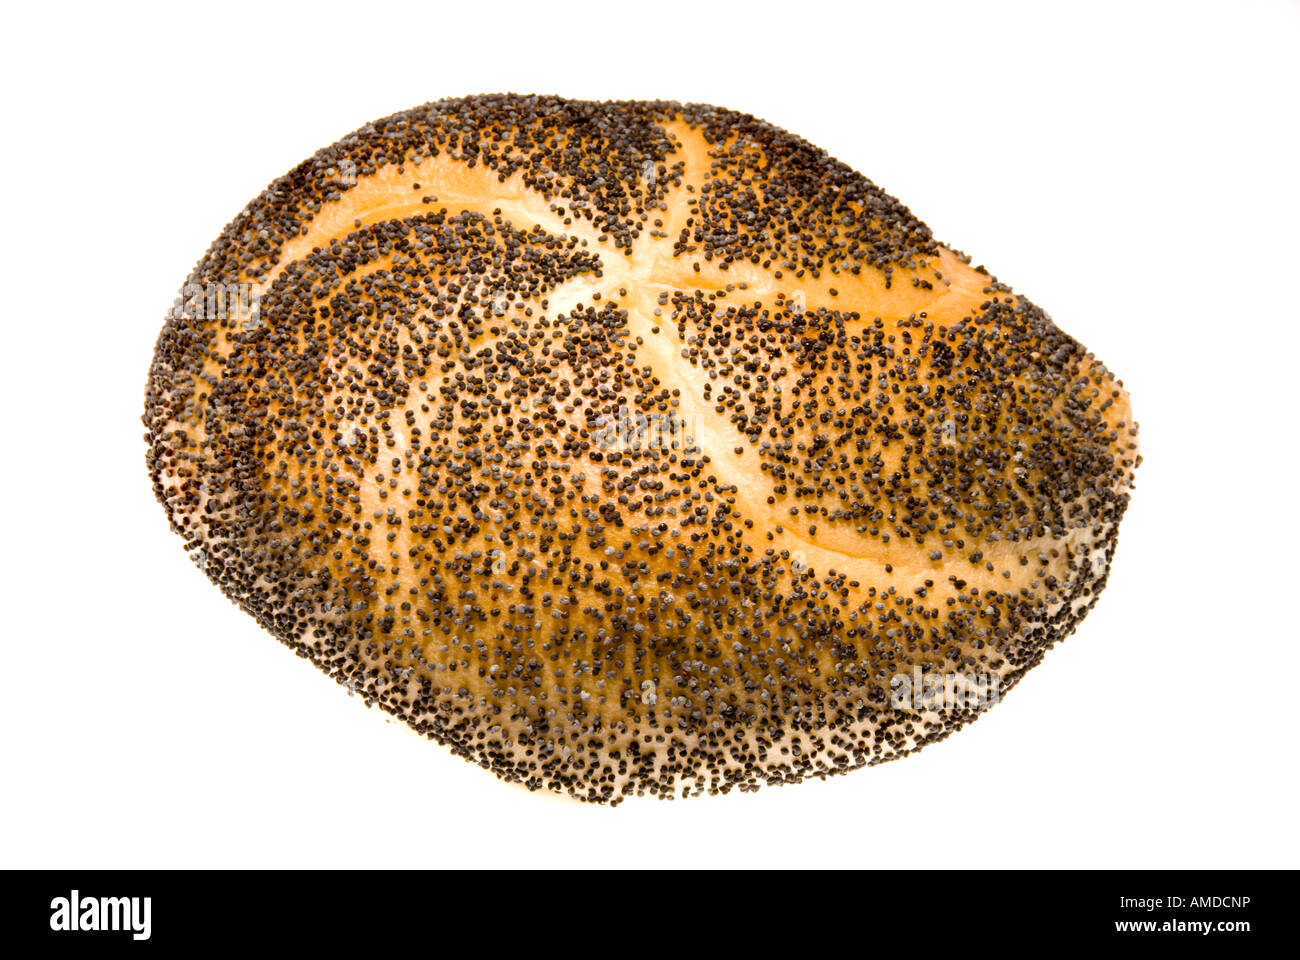 A freshly baked kaiser roll with poppy seed garnish shows its beautiful pattern and scrumptious look Stock Photo